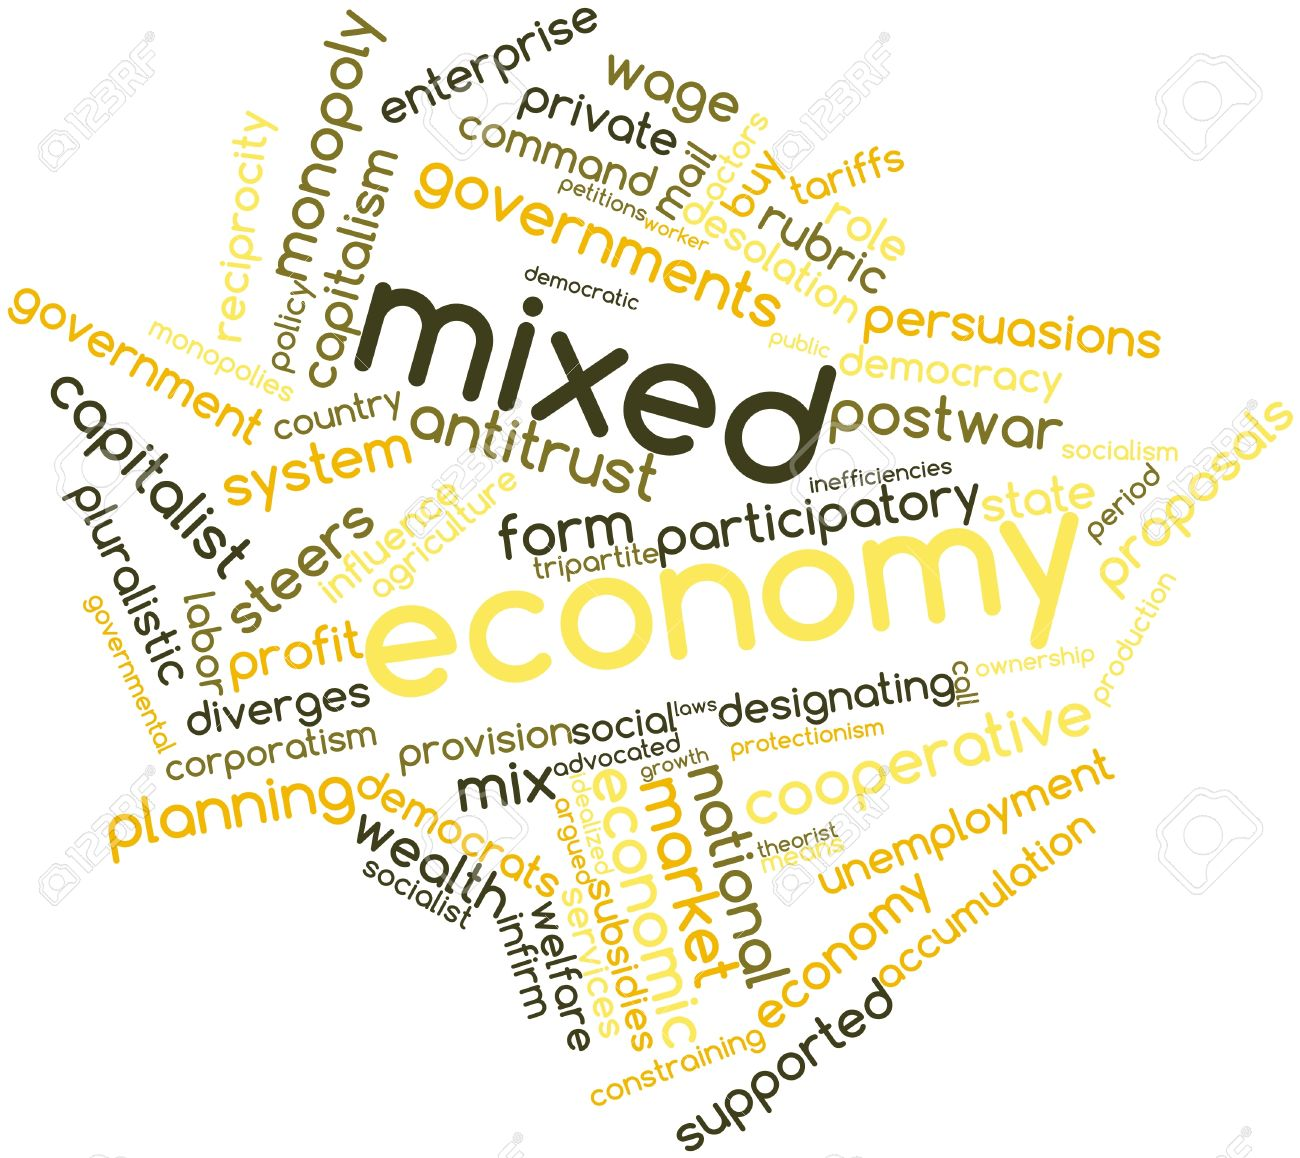 Mixed Economy PNG-PlusPNG.com